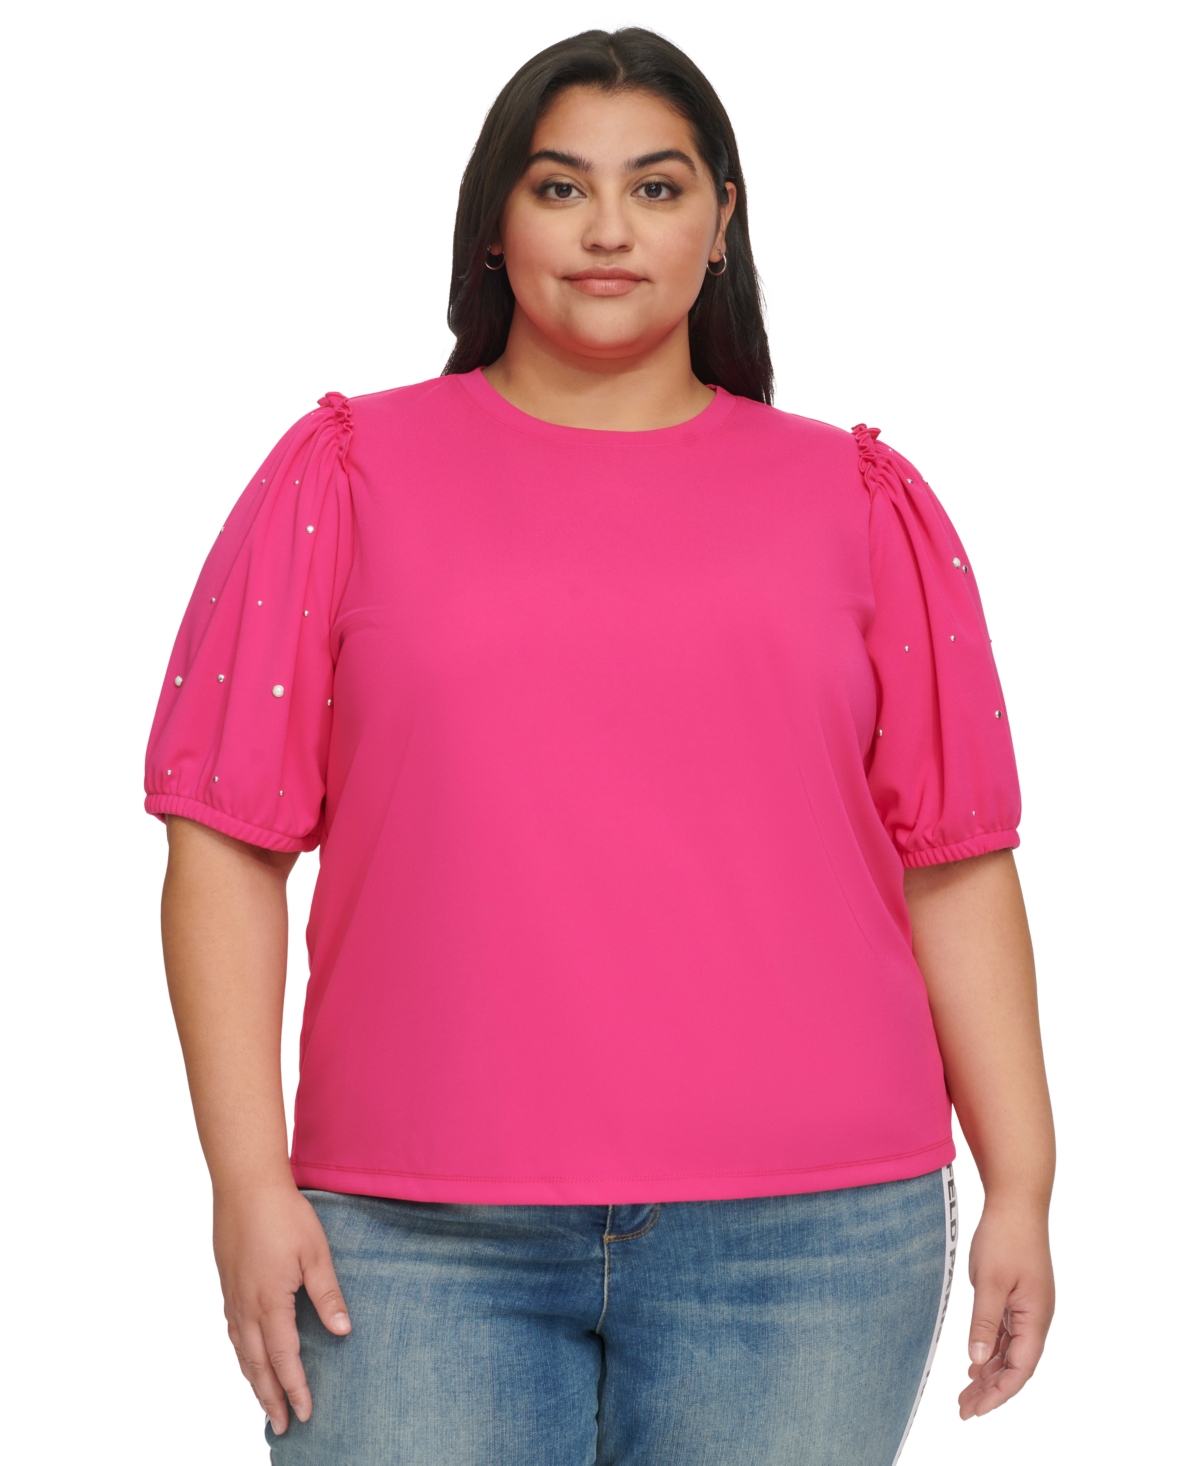 KARL LAGERFELD WOMEN'S PLUS SIZE EMBELLISHED PUFF SLEEVE TOP, FIRST@MACY'S